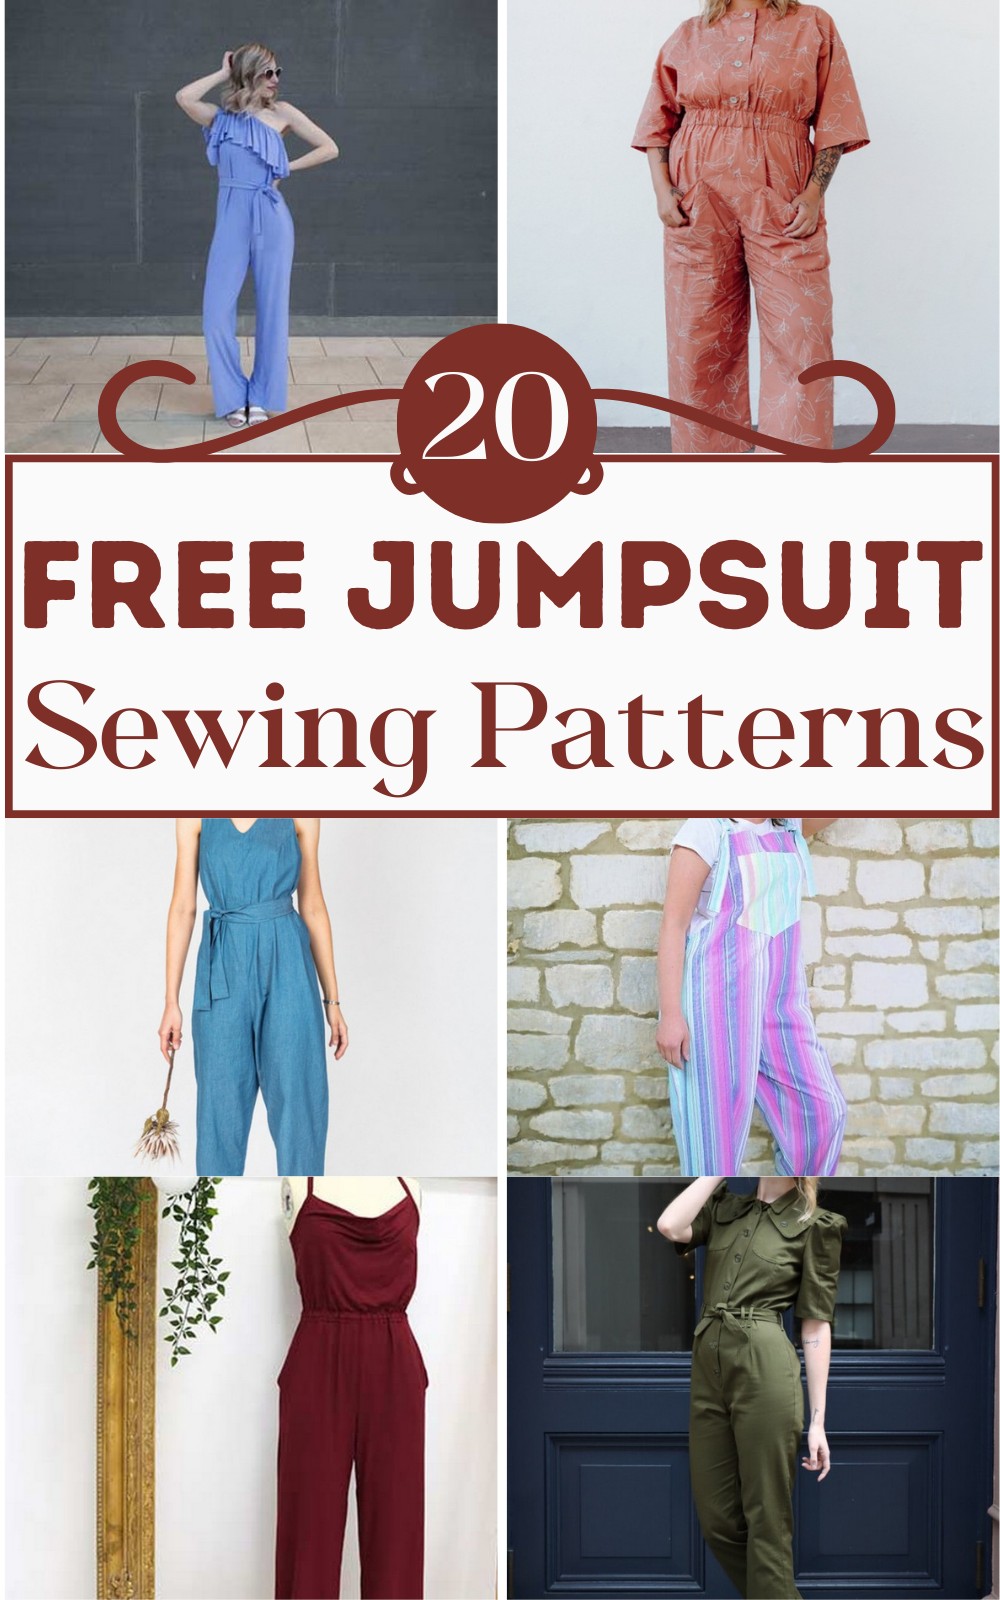 Free Jumpsuit Sewing Patterns (1)